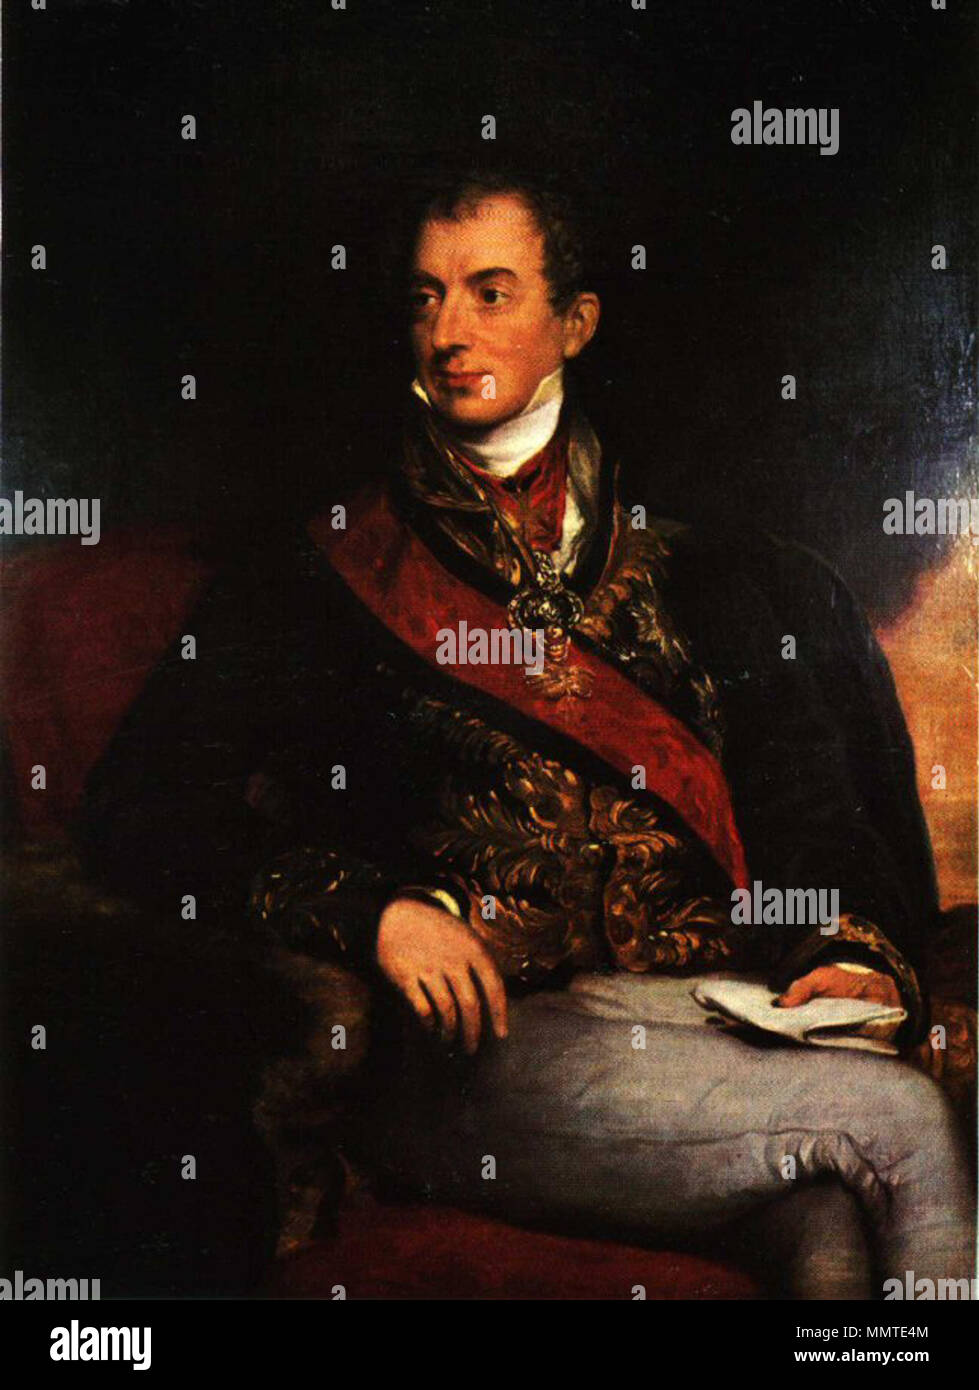 . First exhibited in 1815, the portrait was probably revised in 1818/9 [1]  English: Portrait of Klemens von Metternich, German-Austrian diplomat, politician and statesman (1773-1859) . 1815. Klemens von Metternich by Lawrence Stock Photo